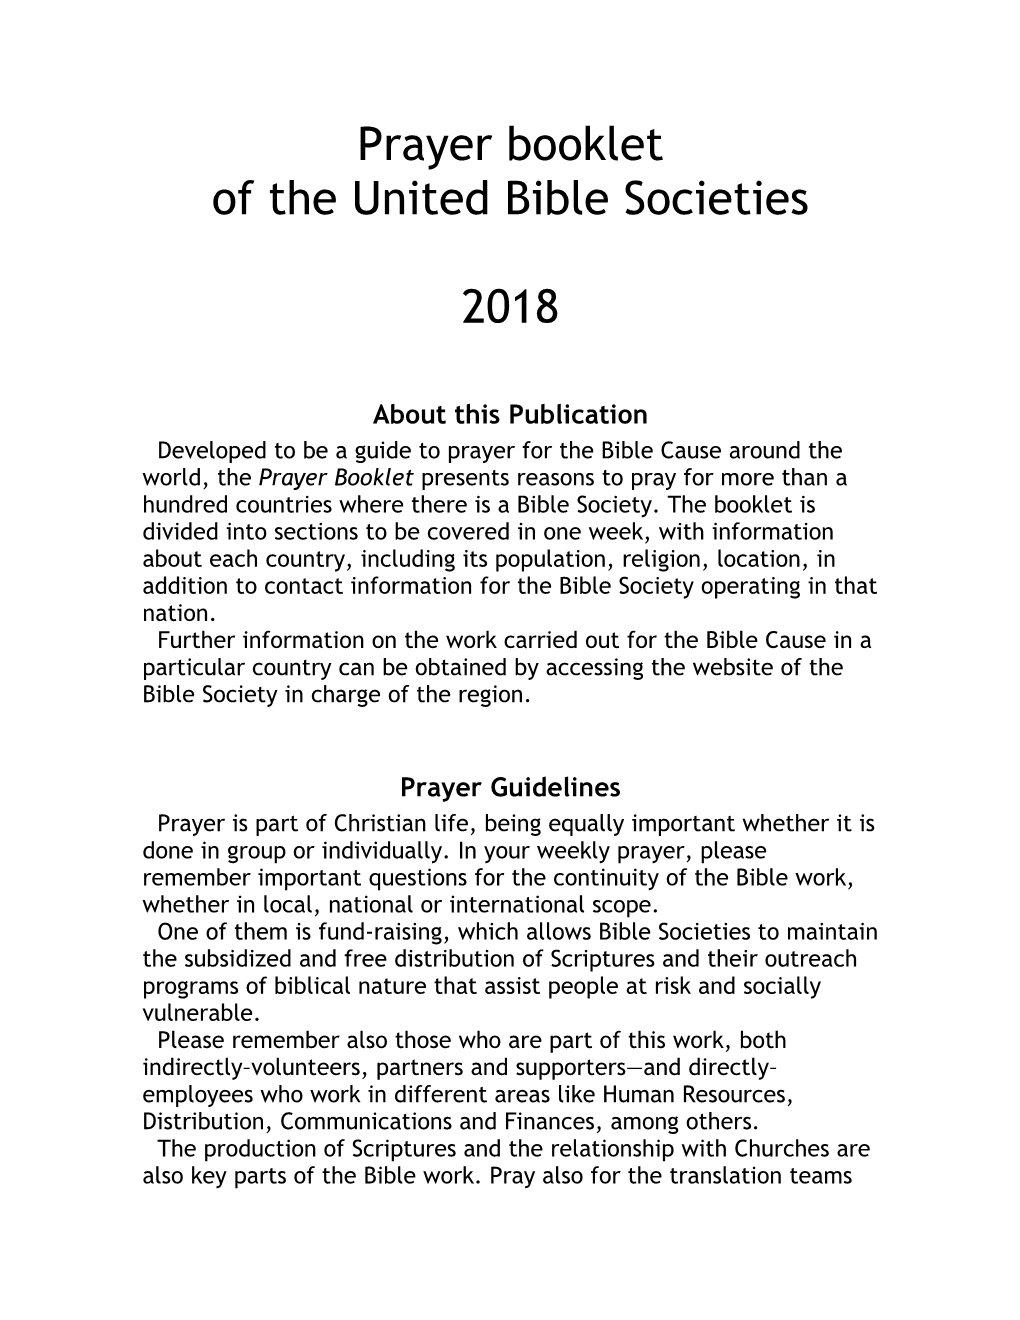 Prayer Booklet of the United Bible Societies 2018